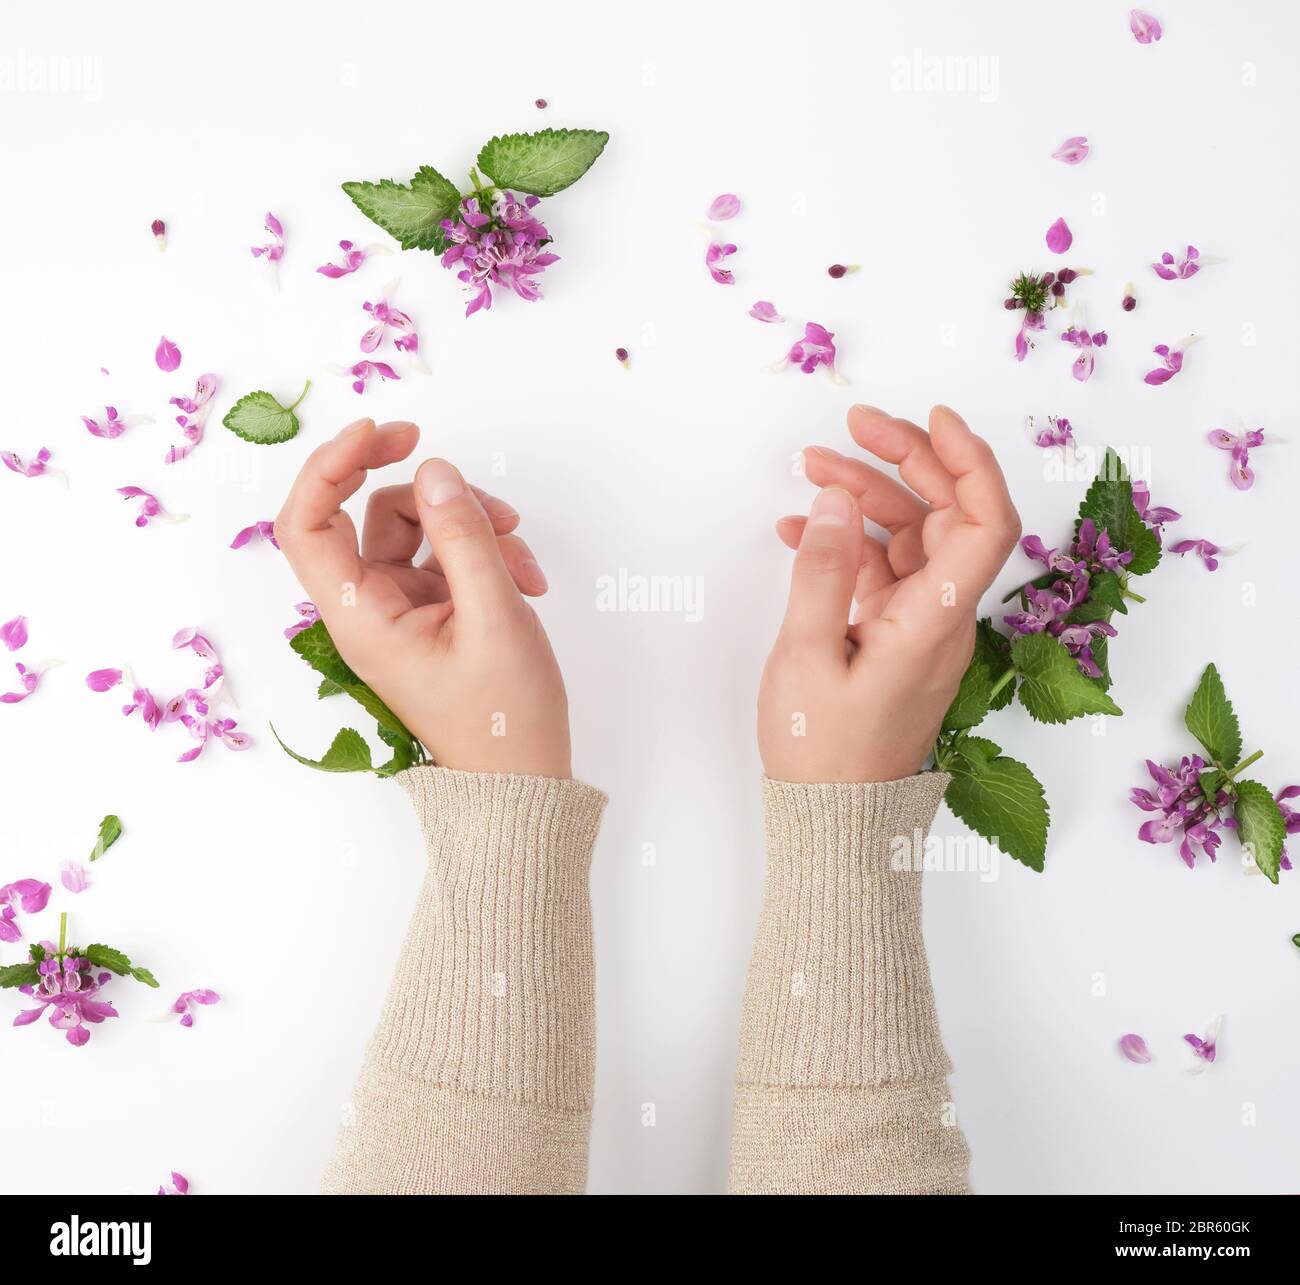 female hands and pink small flowers on a white  background, fashionable concept for hand skin care, anti-aging care, spa treatments, hands conditional Stock Photo